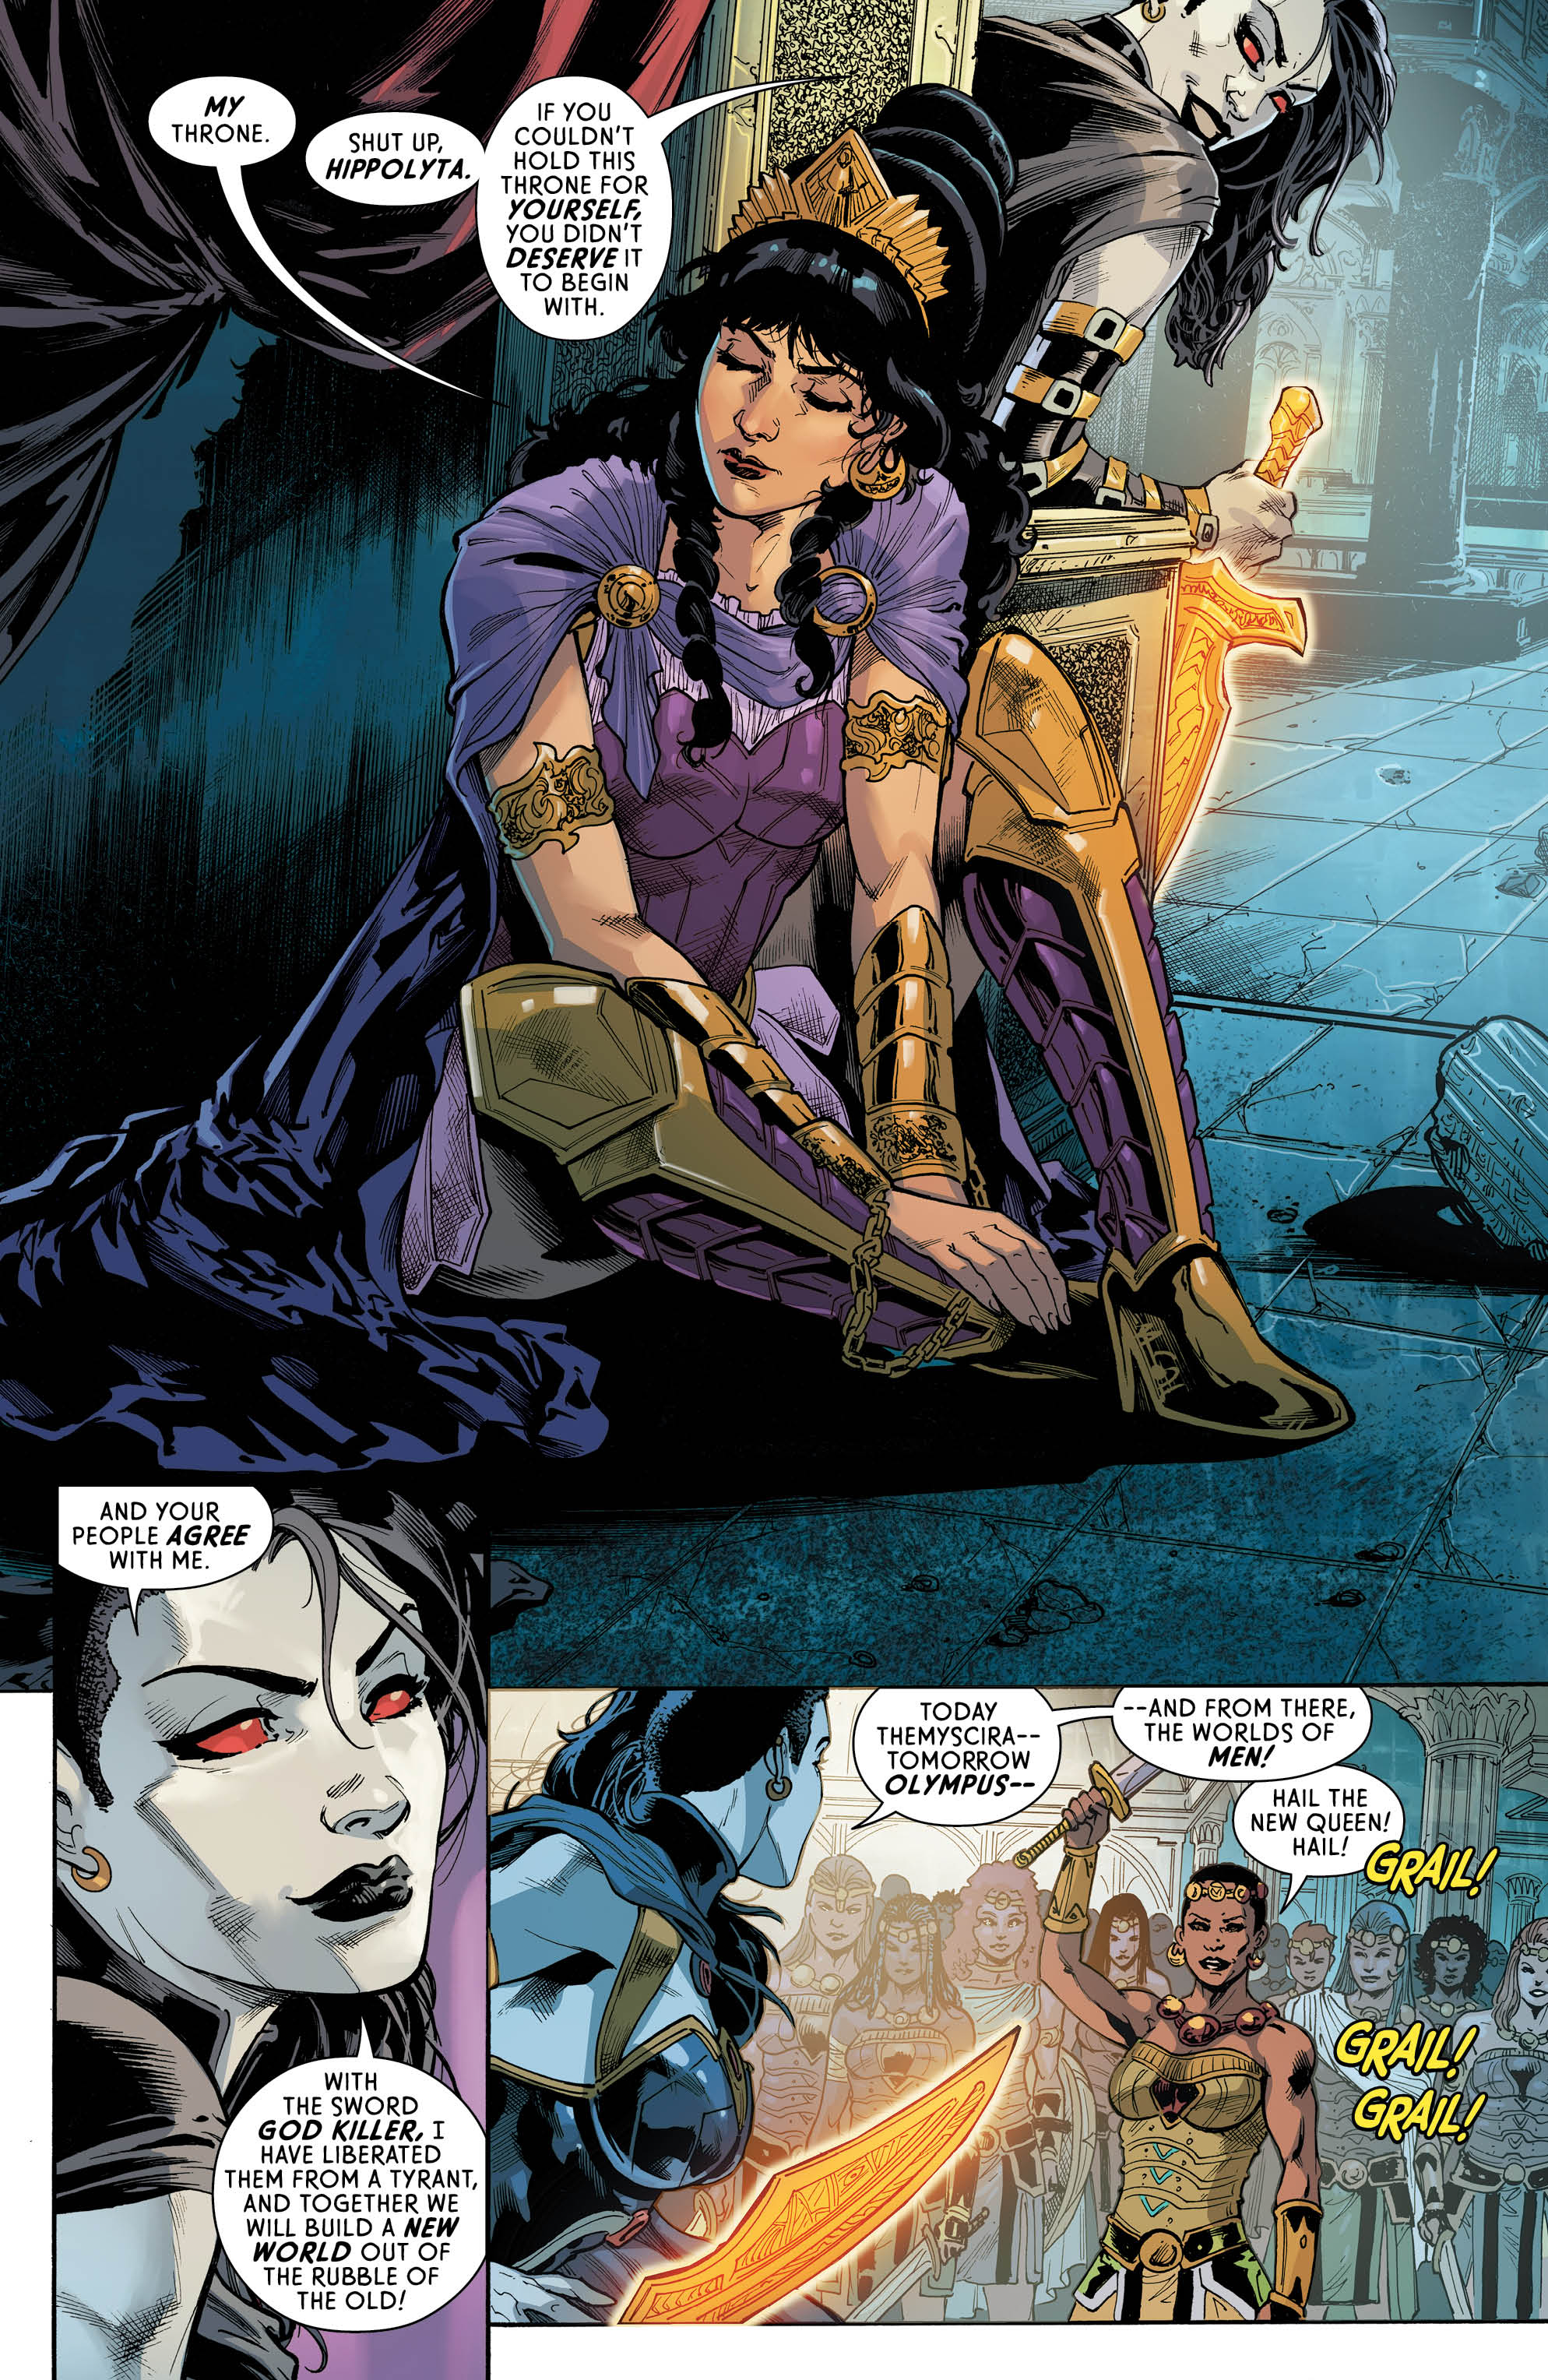 Wonder Woman Faces Grail for the Fate of Themyscira | Den ...